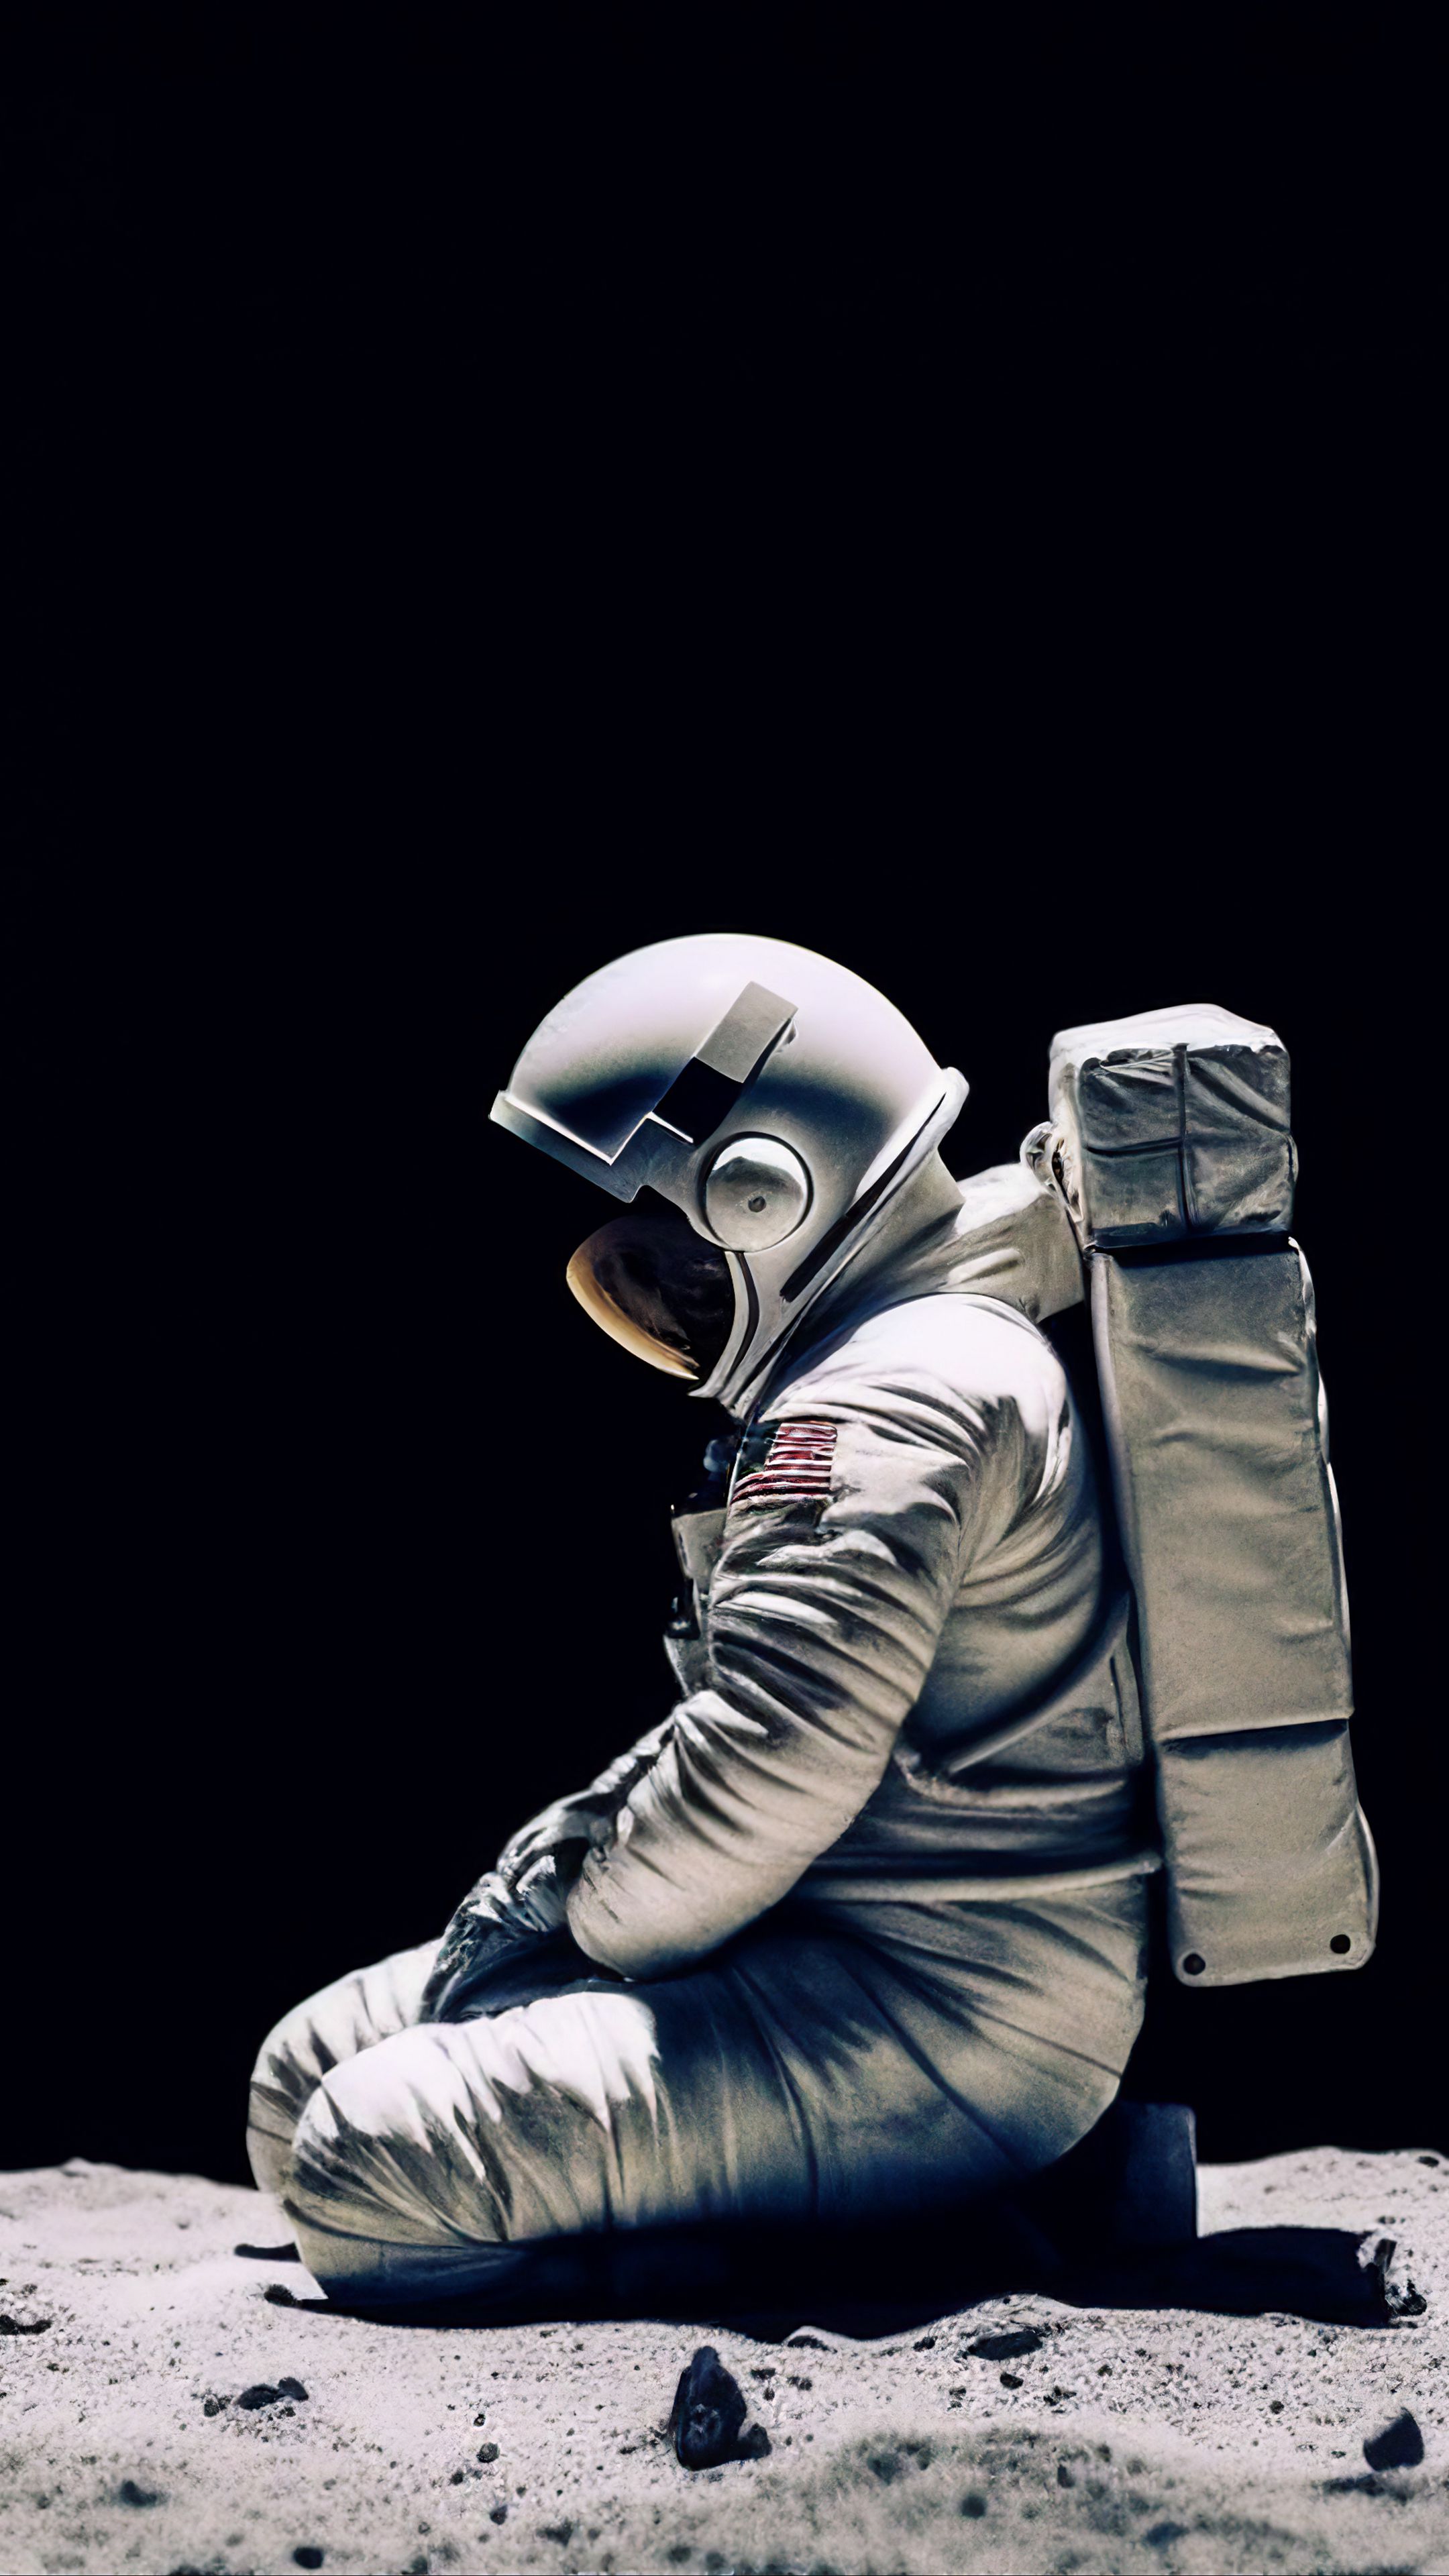 Download Wallpaper 2160x3840 Astronaut Spacesuit Pose Sand Samsung Galaxy S4 S5 Note Sony 3400